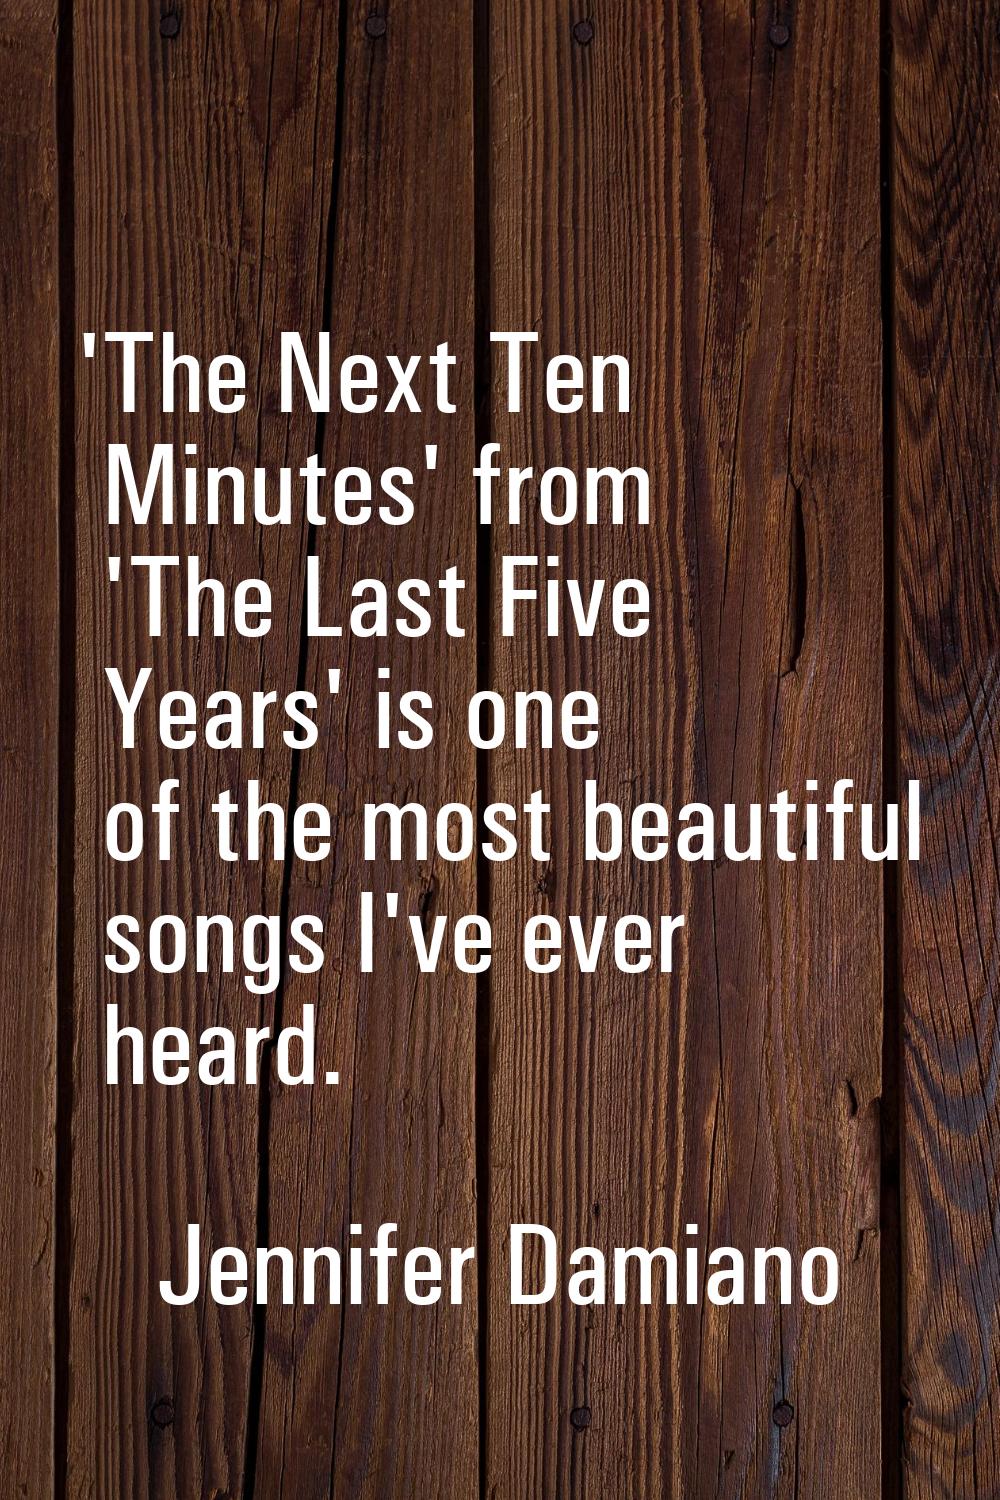 'The Next Ten Minutes' from 'The Last Five Years' is one of the most beautiful songs I've ever hear